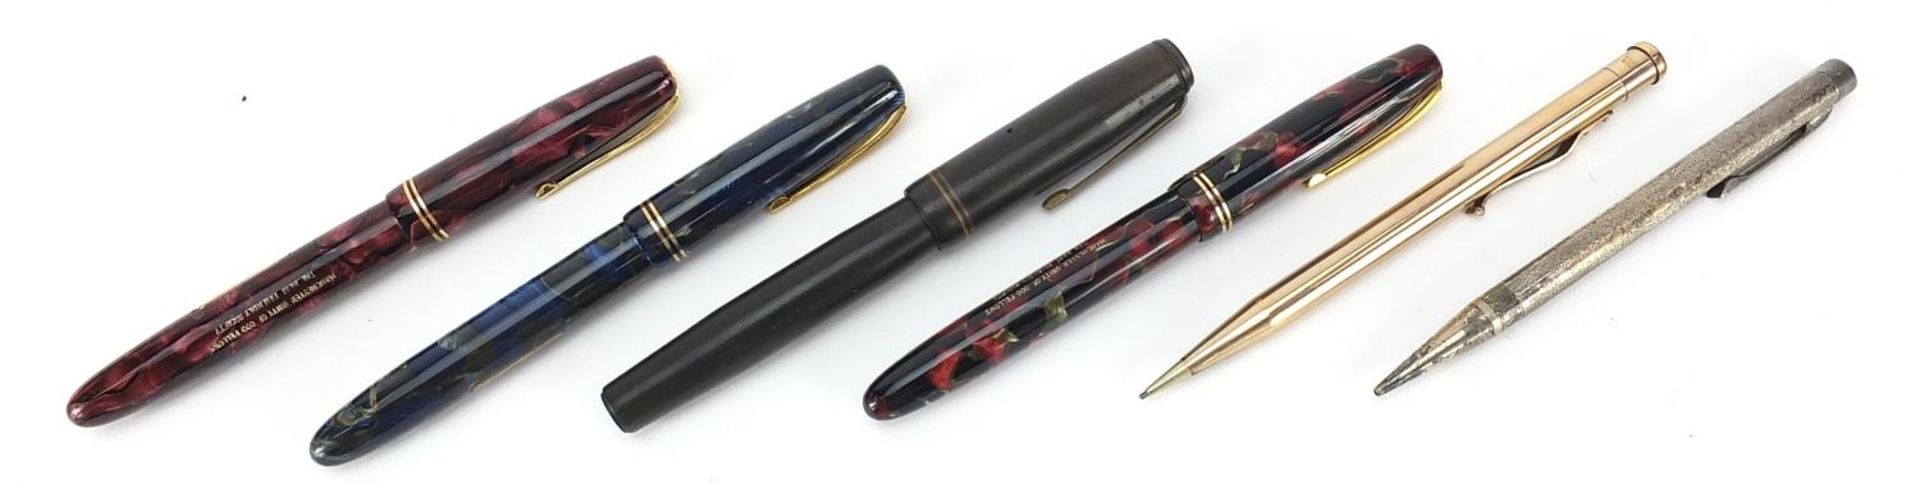 Vintage fountain pens and propelling pencils including three marbleised Burnham fountain pens with